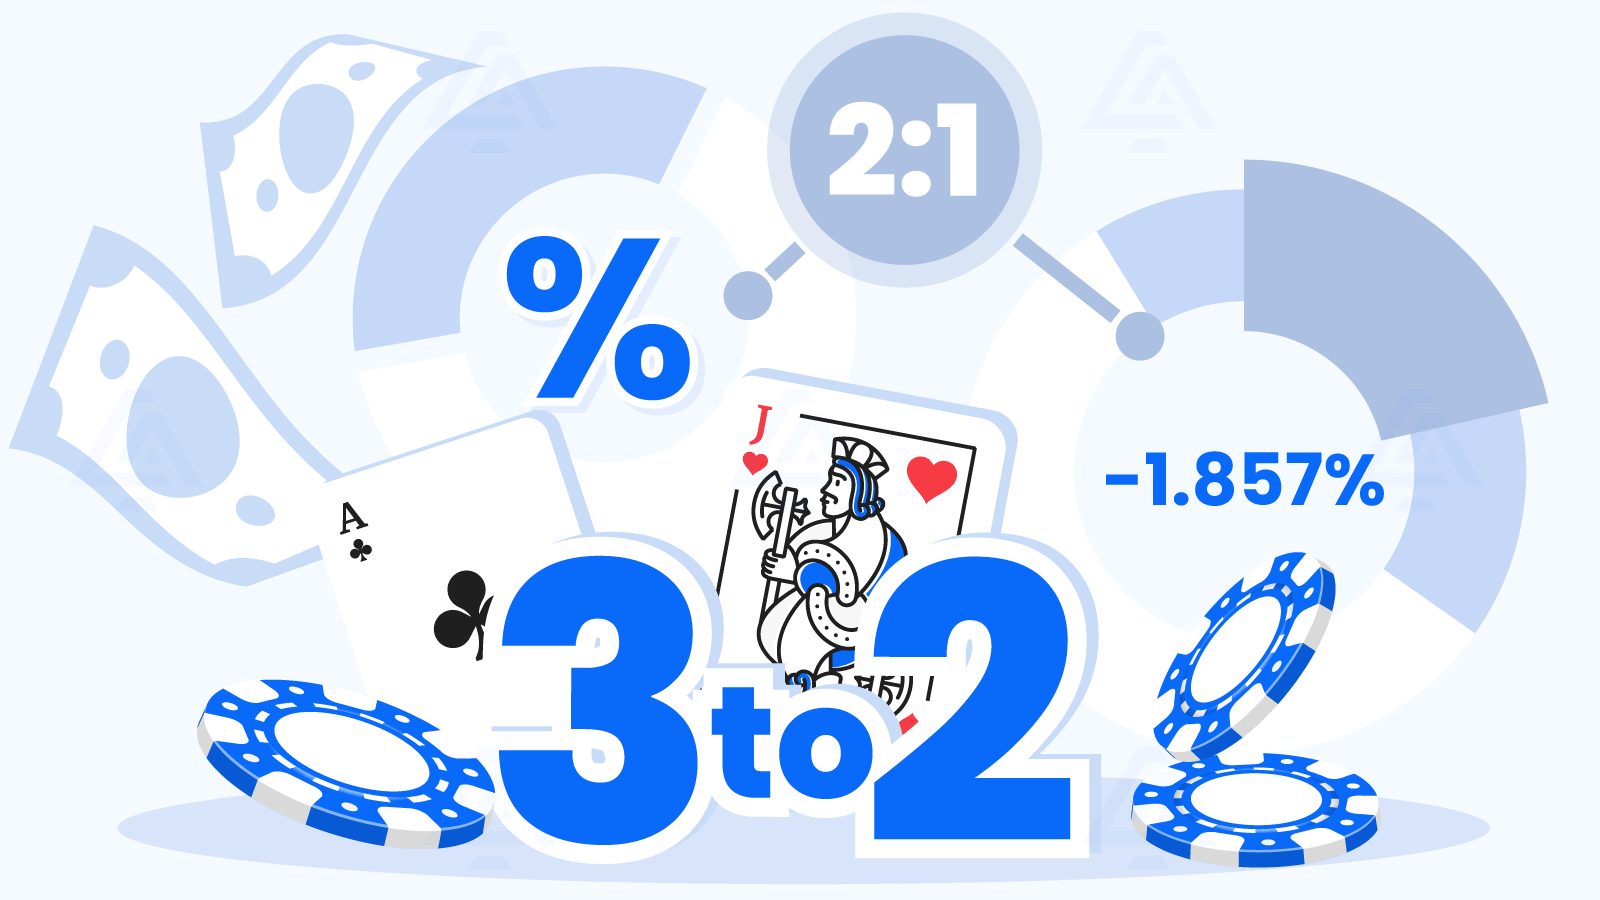 3to2 Blackjack Provides Better Odds for Players